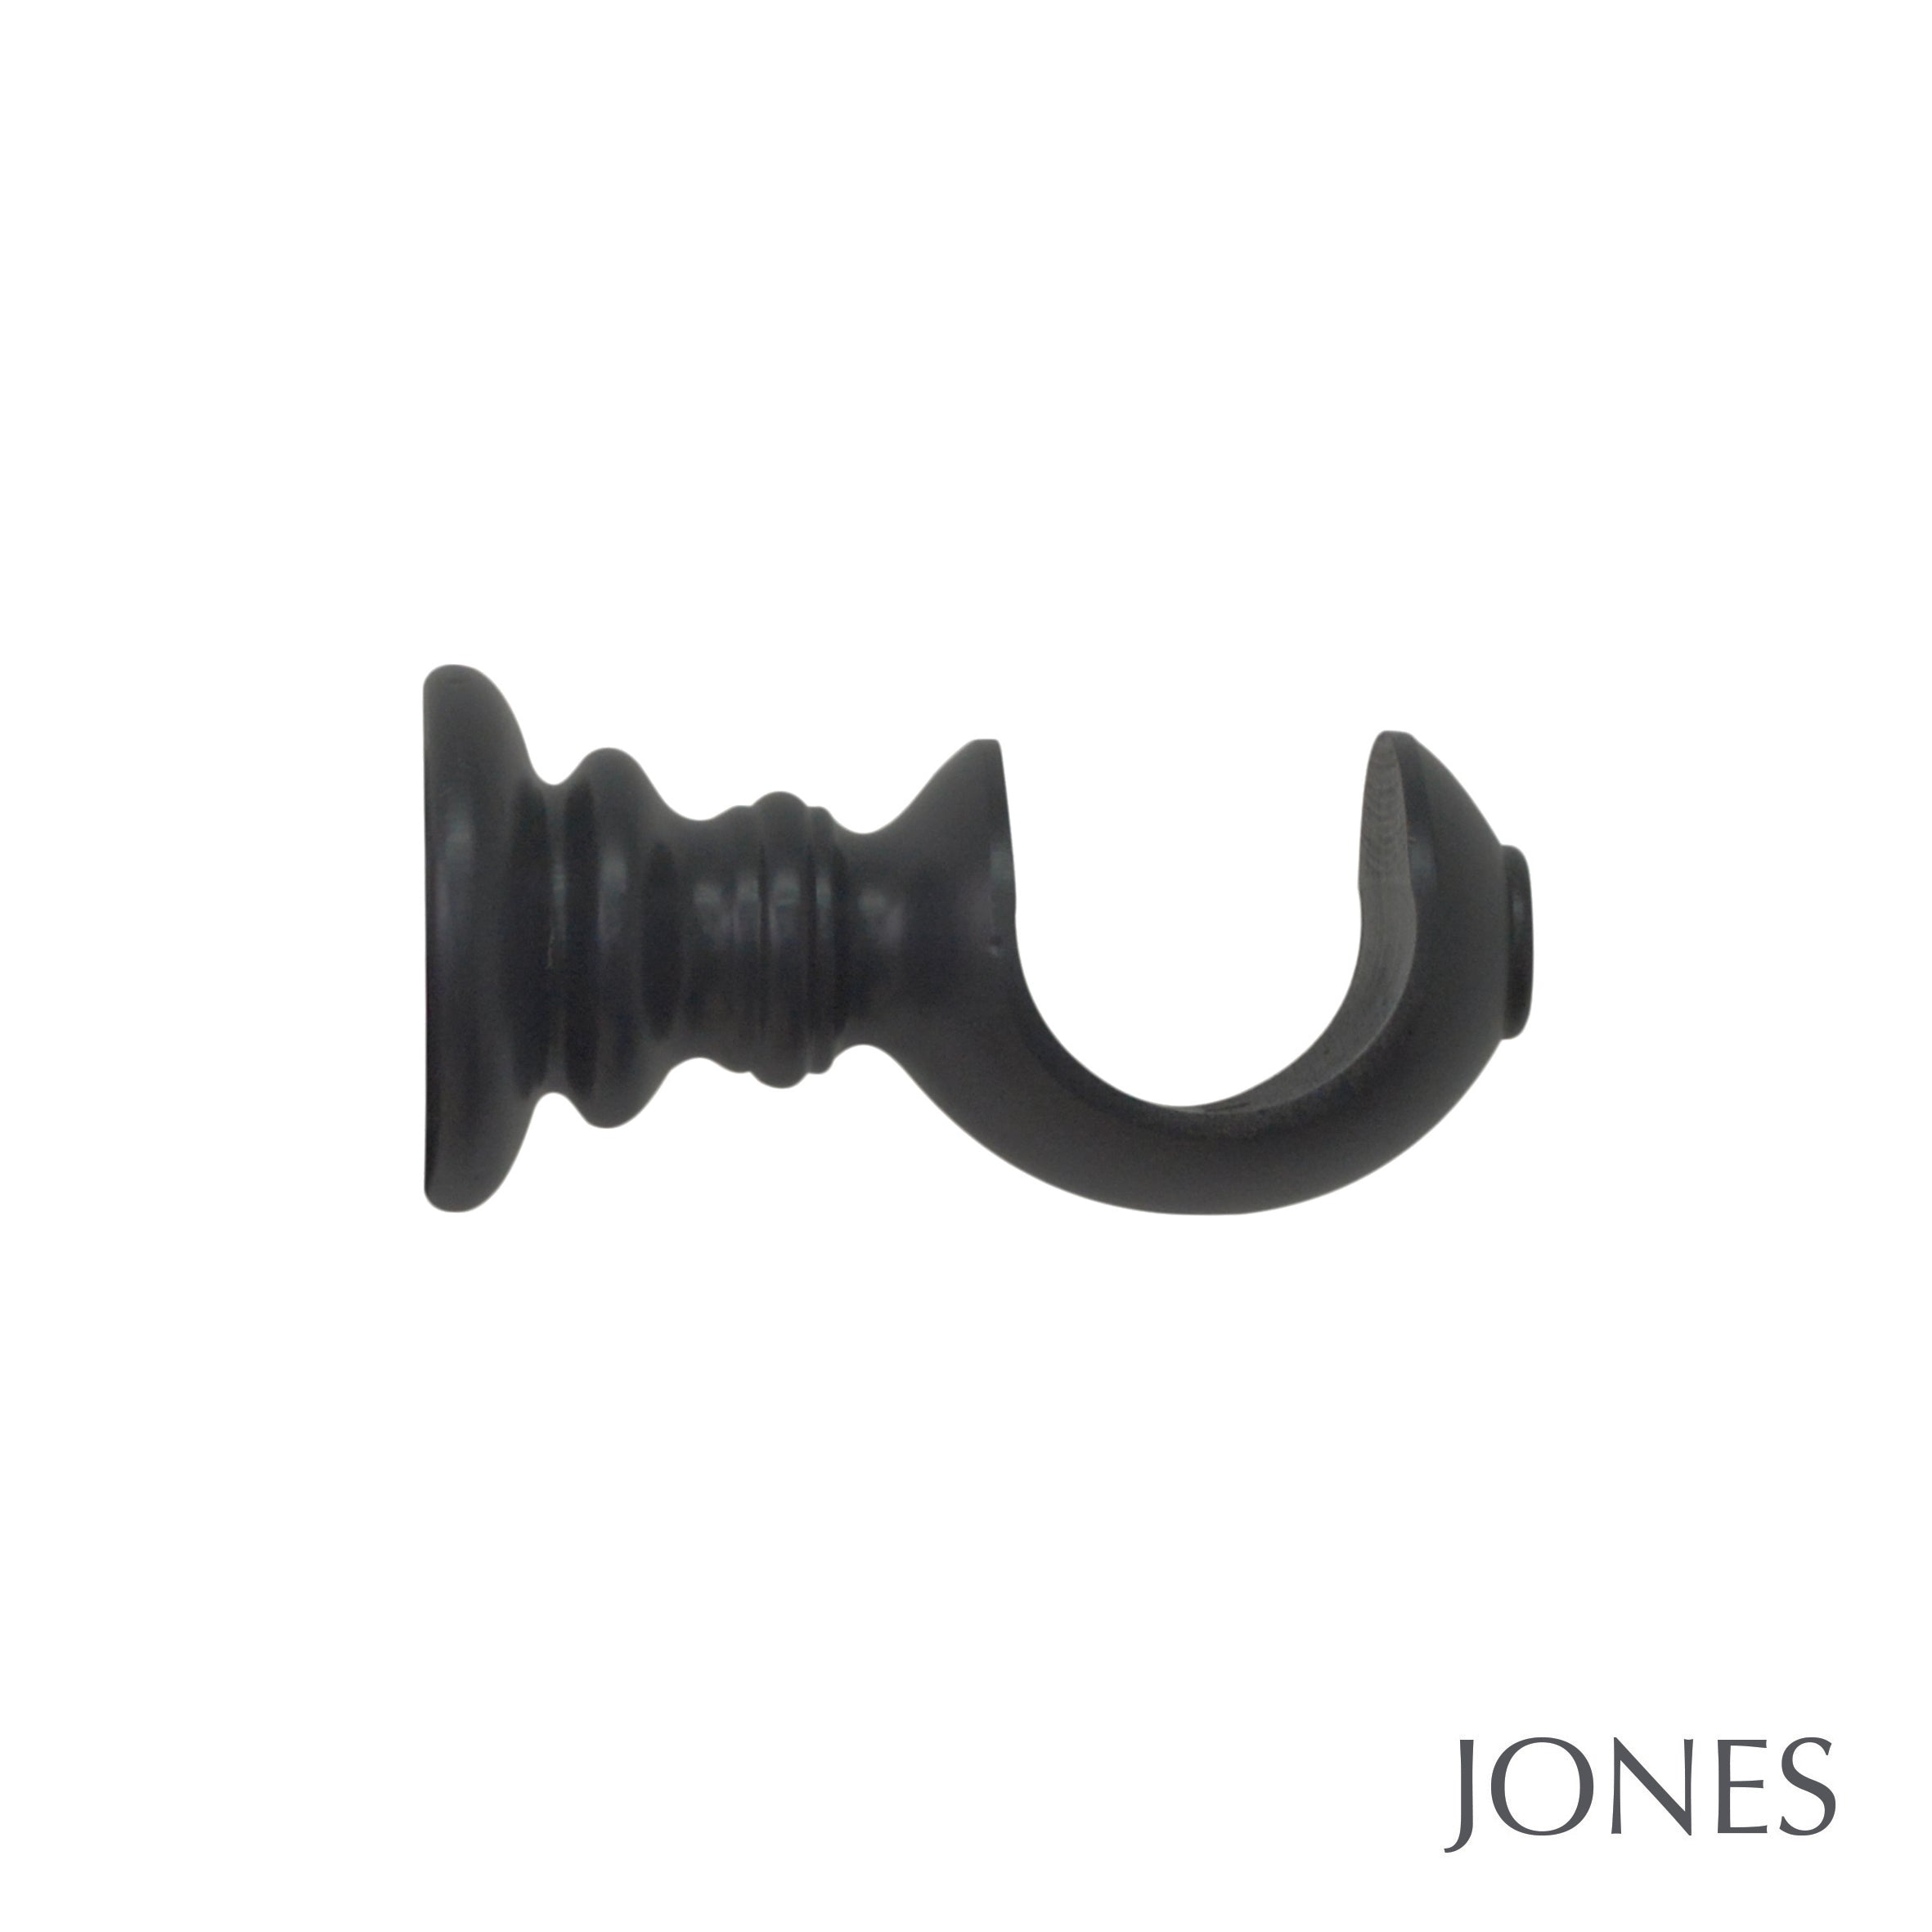 Jones Interiors Estate Ribbed Ball Finial Curtain Pole Set in Charcoal